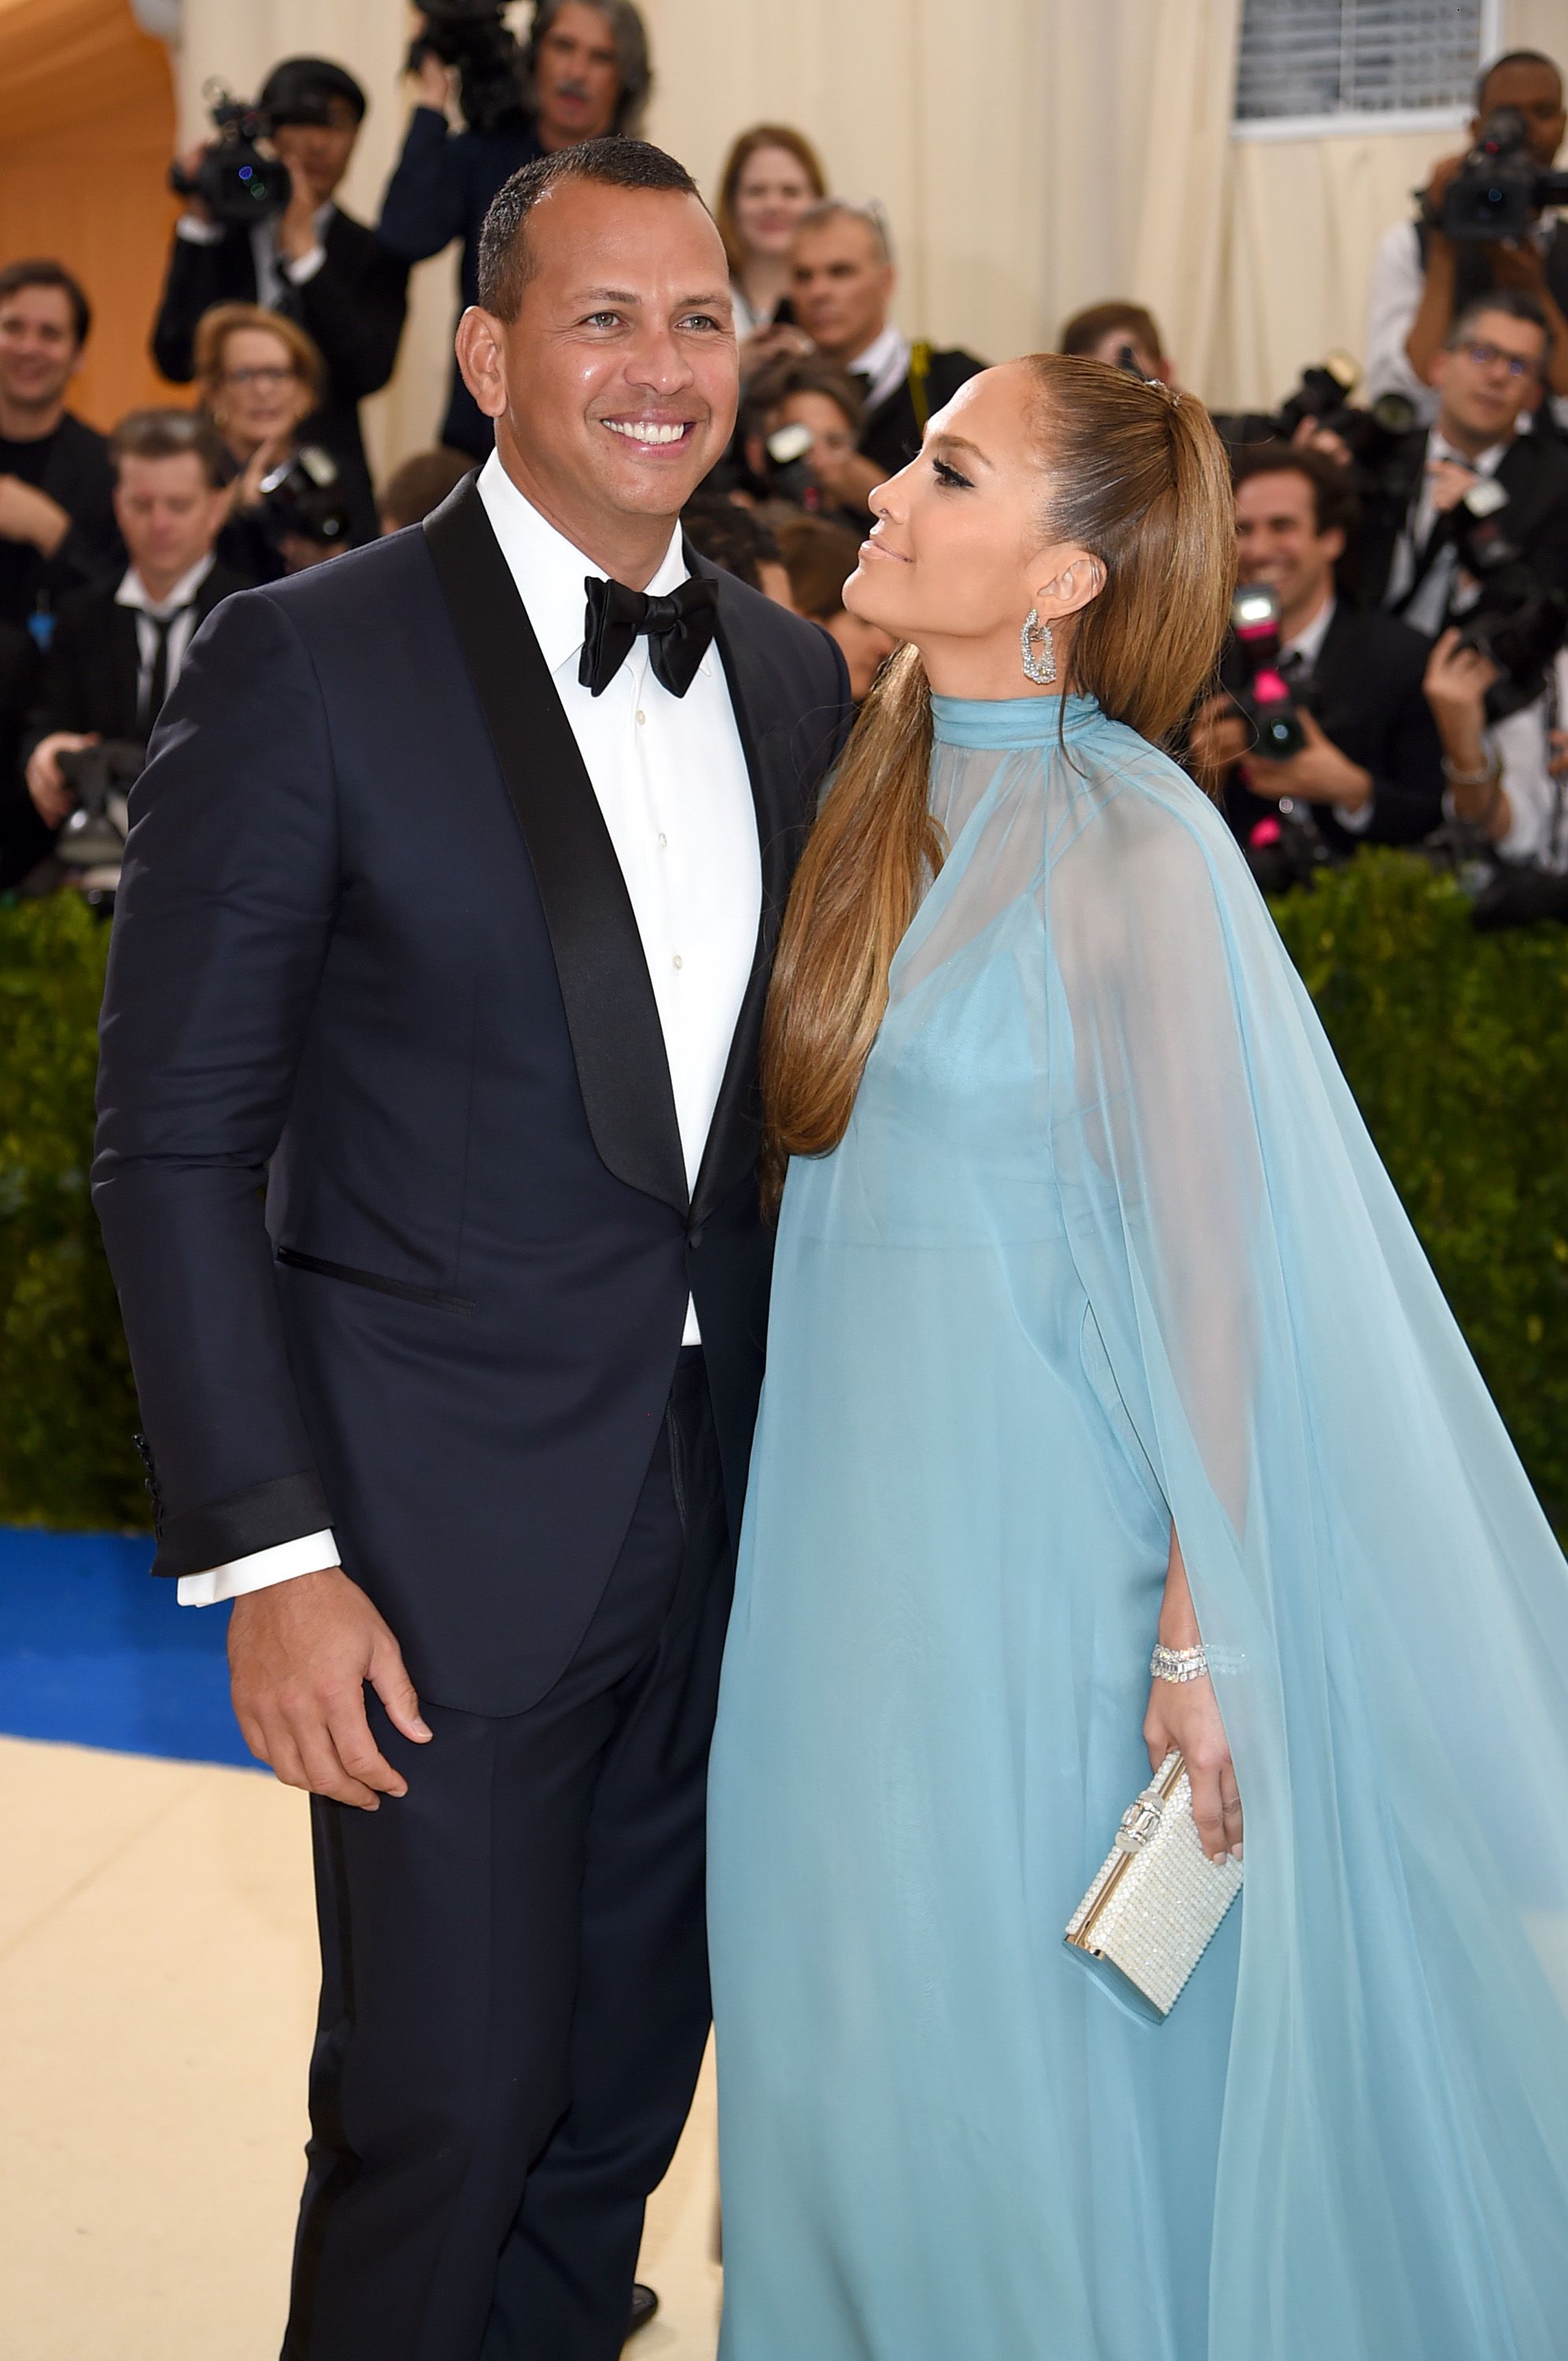 Jose Canseco accuses Alex Rodriguez of cheating on Jennifer Lopez